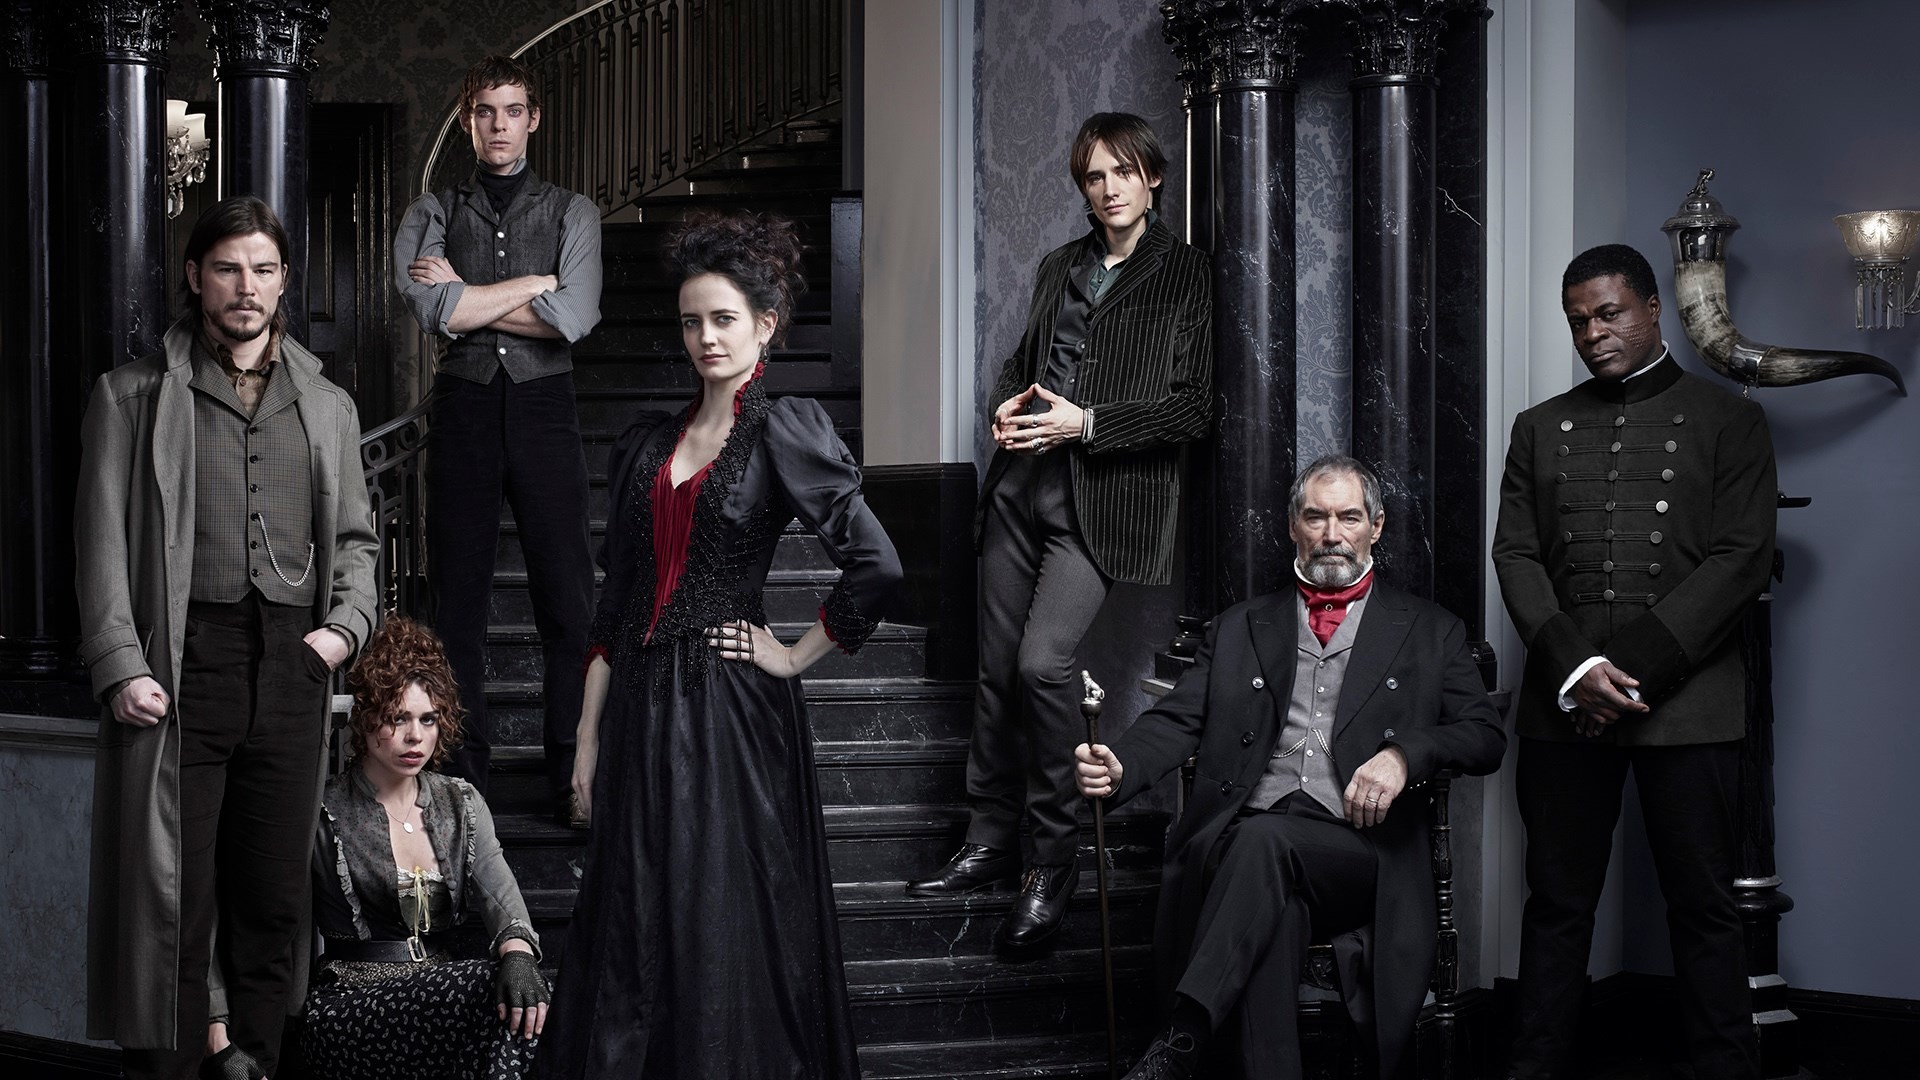 1920x1080 free wallpaper and screensavers for penny dreadful